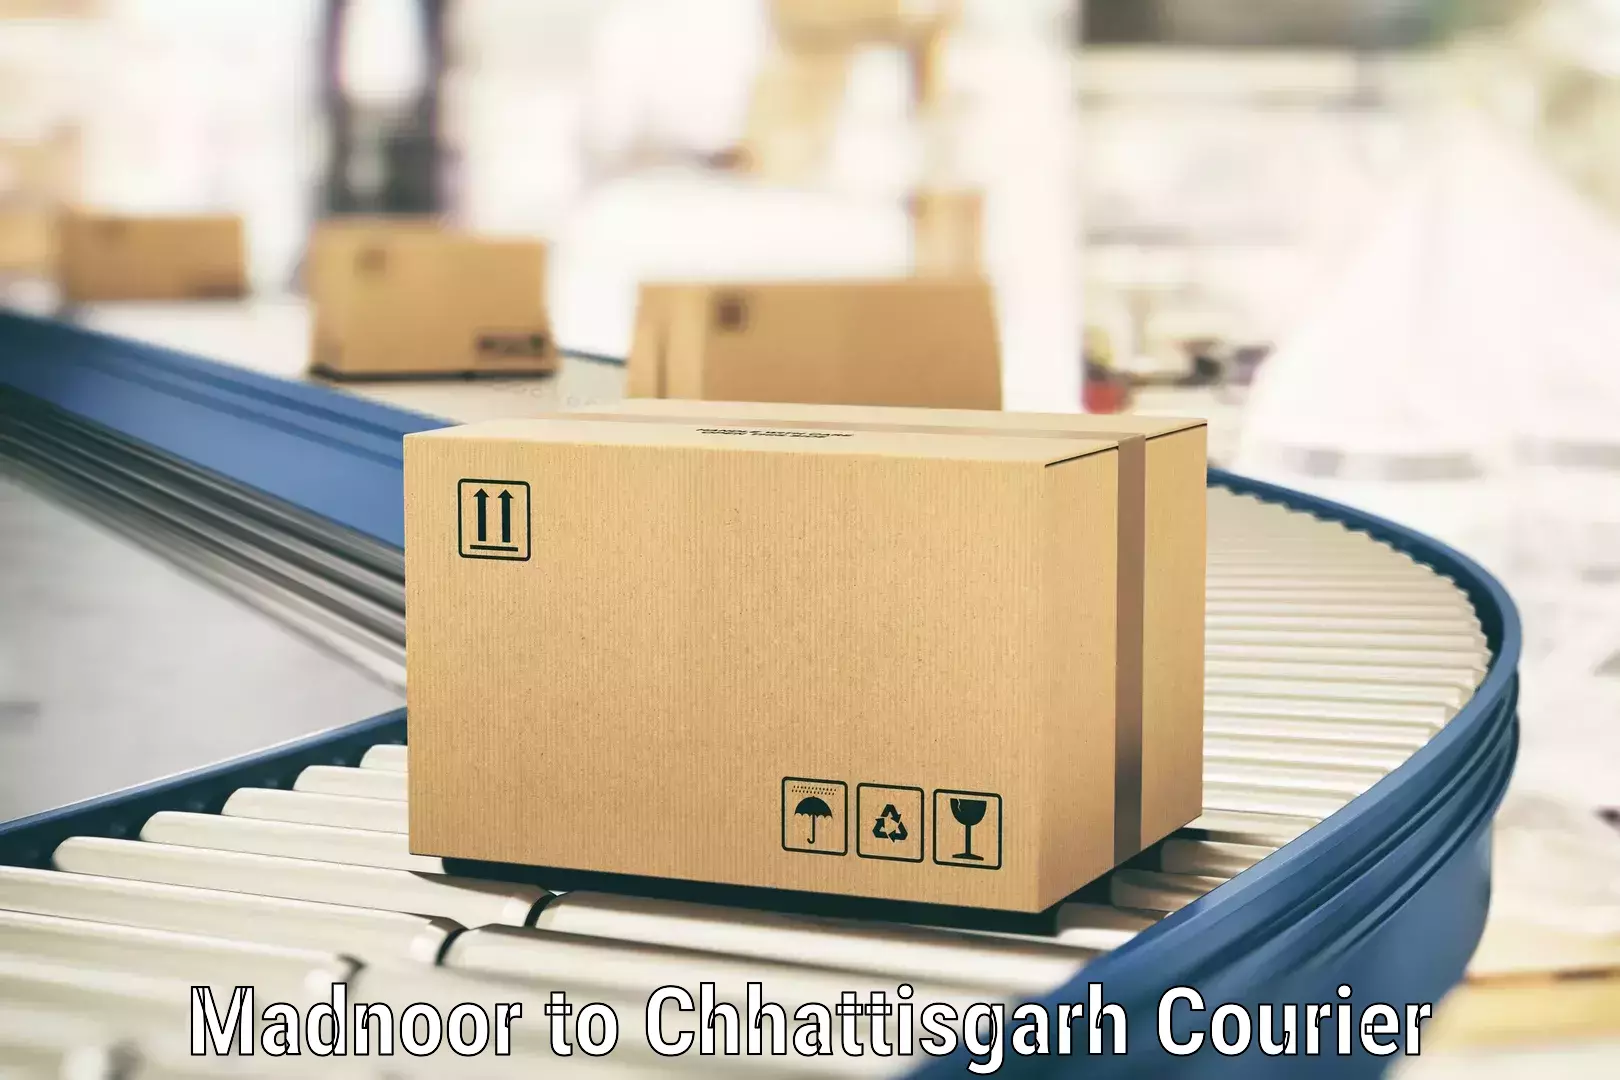 Customizable shipping options Madnoor to Raigarh